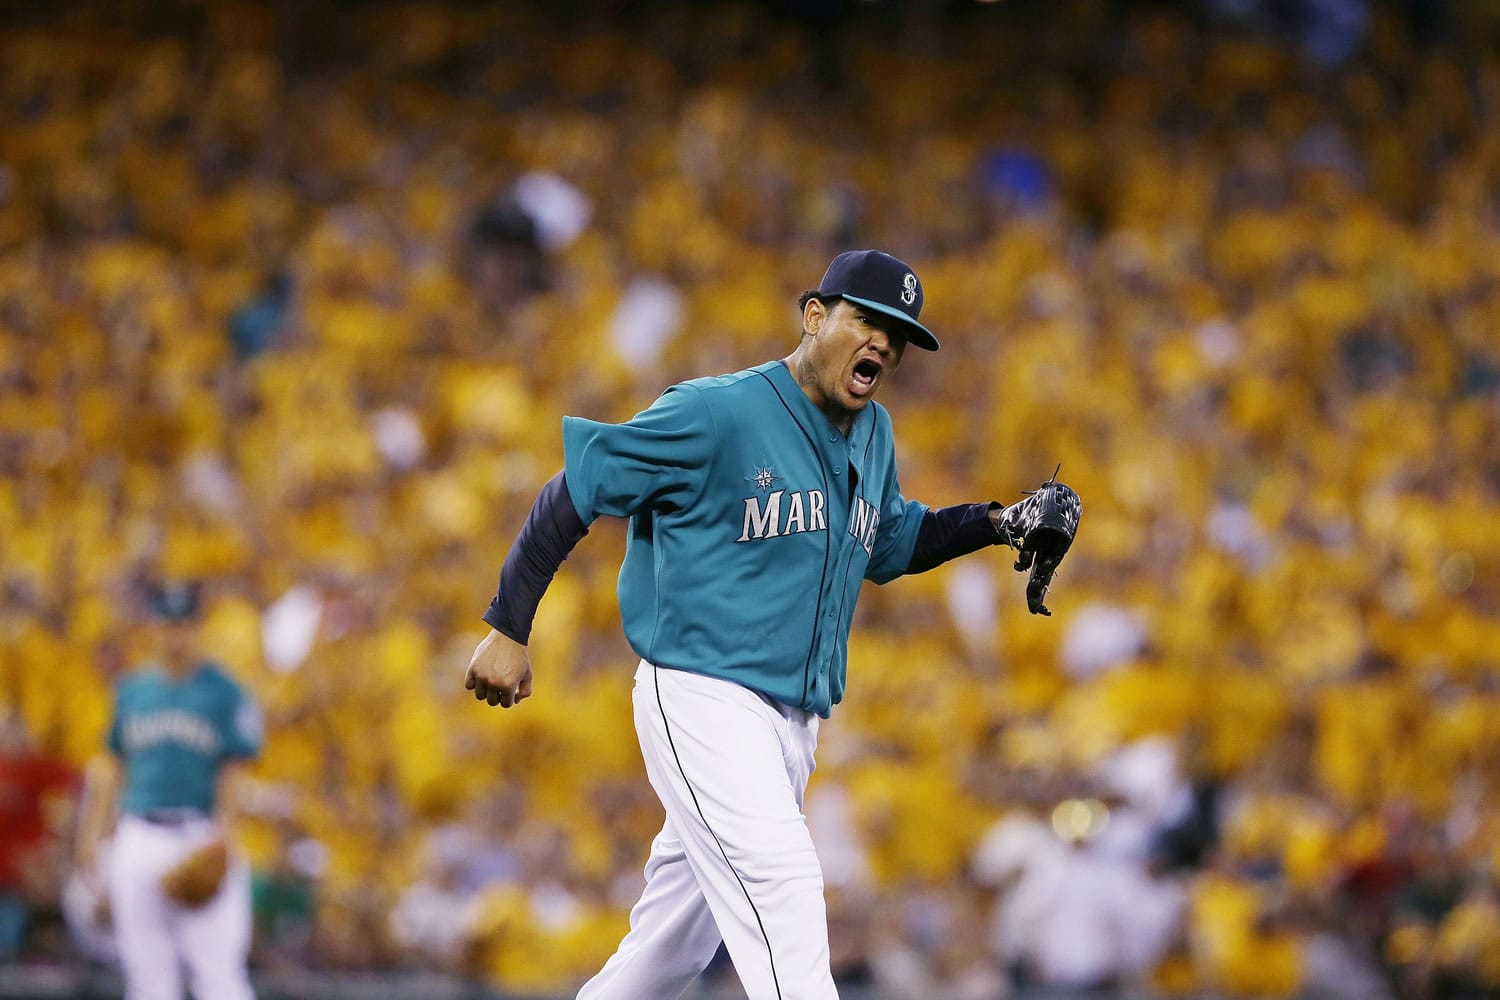 With a sea of yellow from his &quot;King's Court&quot; cheering section behind him, Seattle Mariners starting pitcher Felix Hernandez yells after a double play in the eighth inning of a baseball game against the Oakland Athletics, Friday, July 11, 2014, in Seattle. (AP Photo/Ted S.